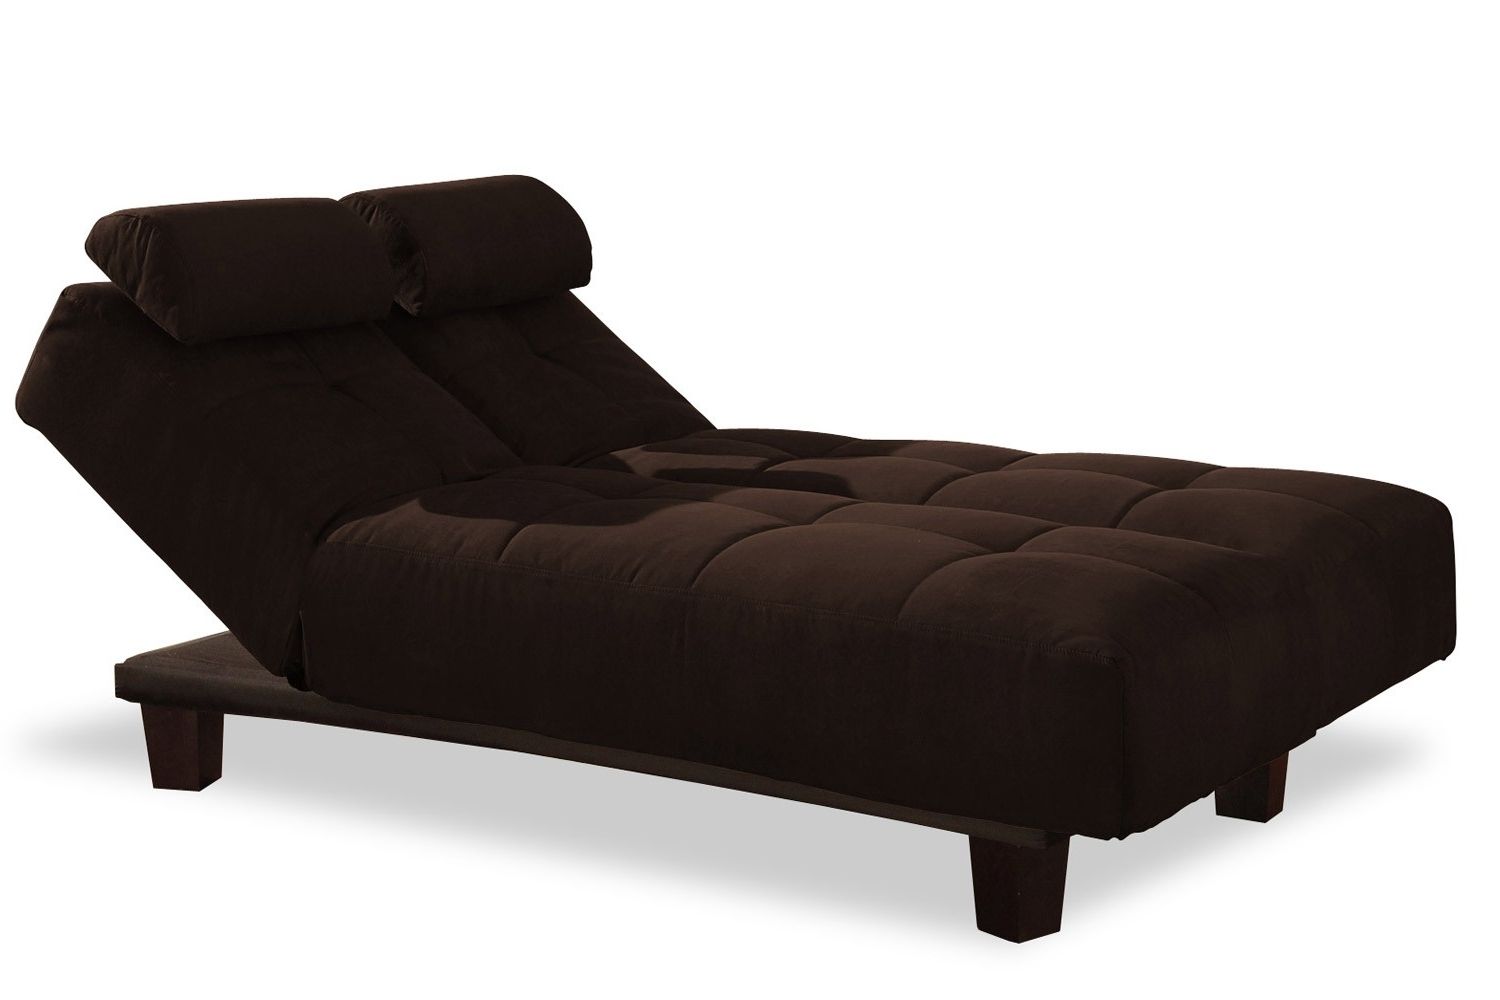 Sofia Sofa Bed And Chaise For Current Futon Chaises (View 9 of 15)